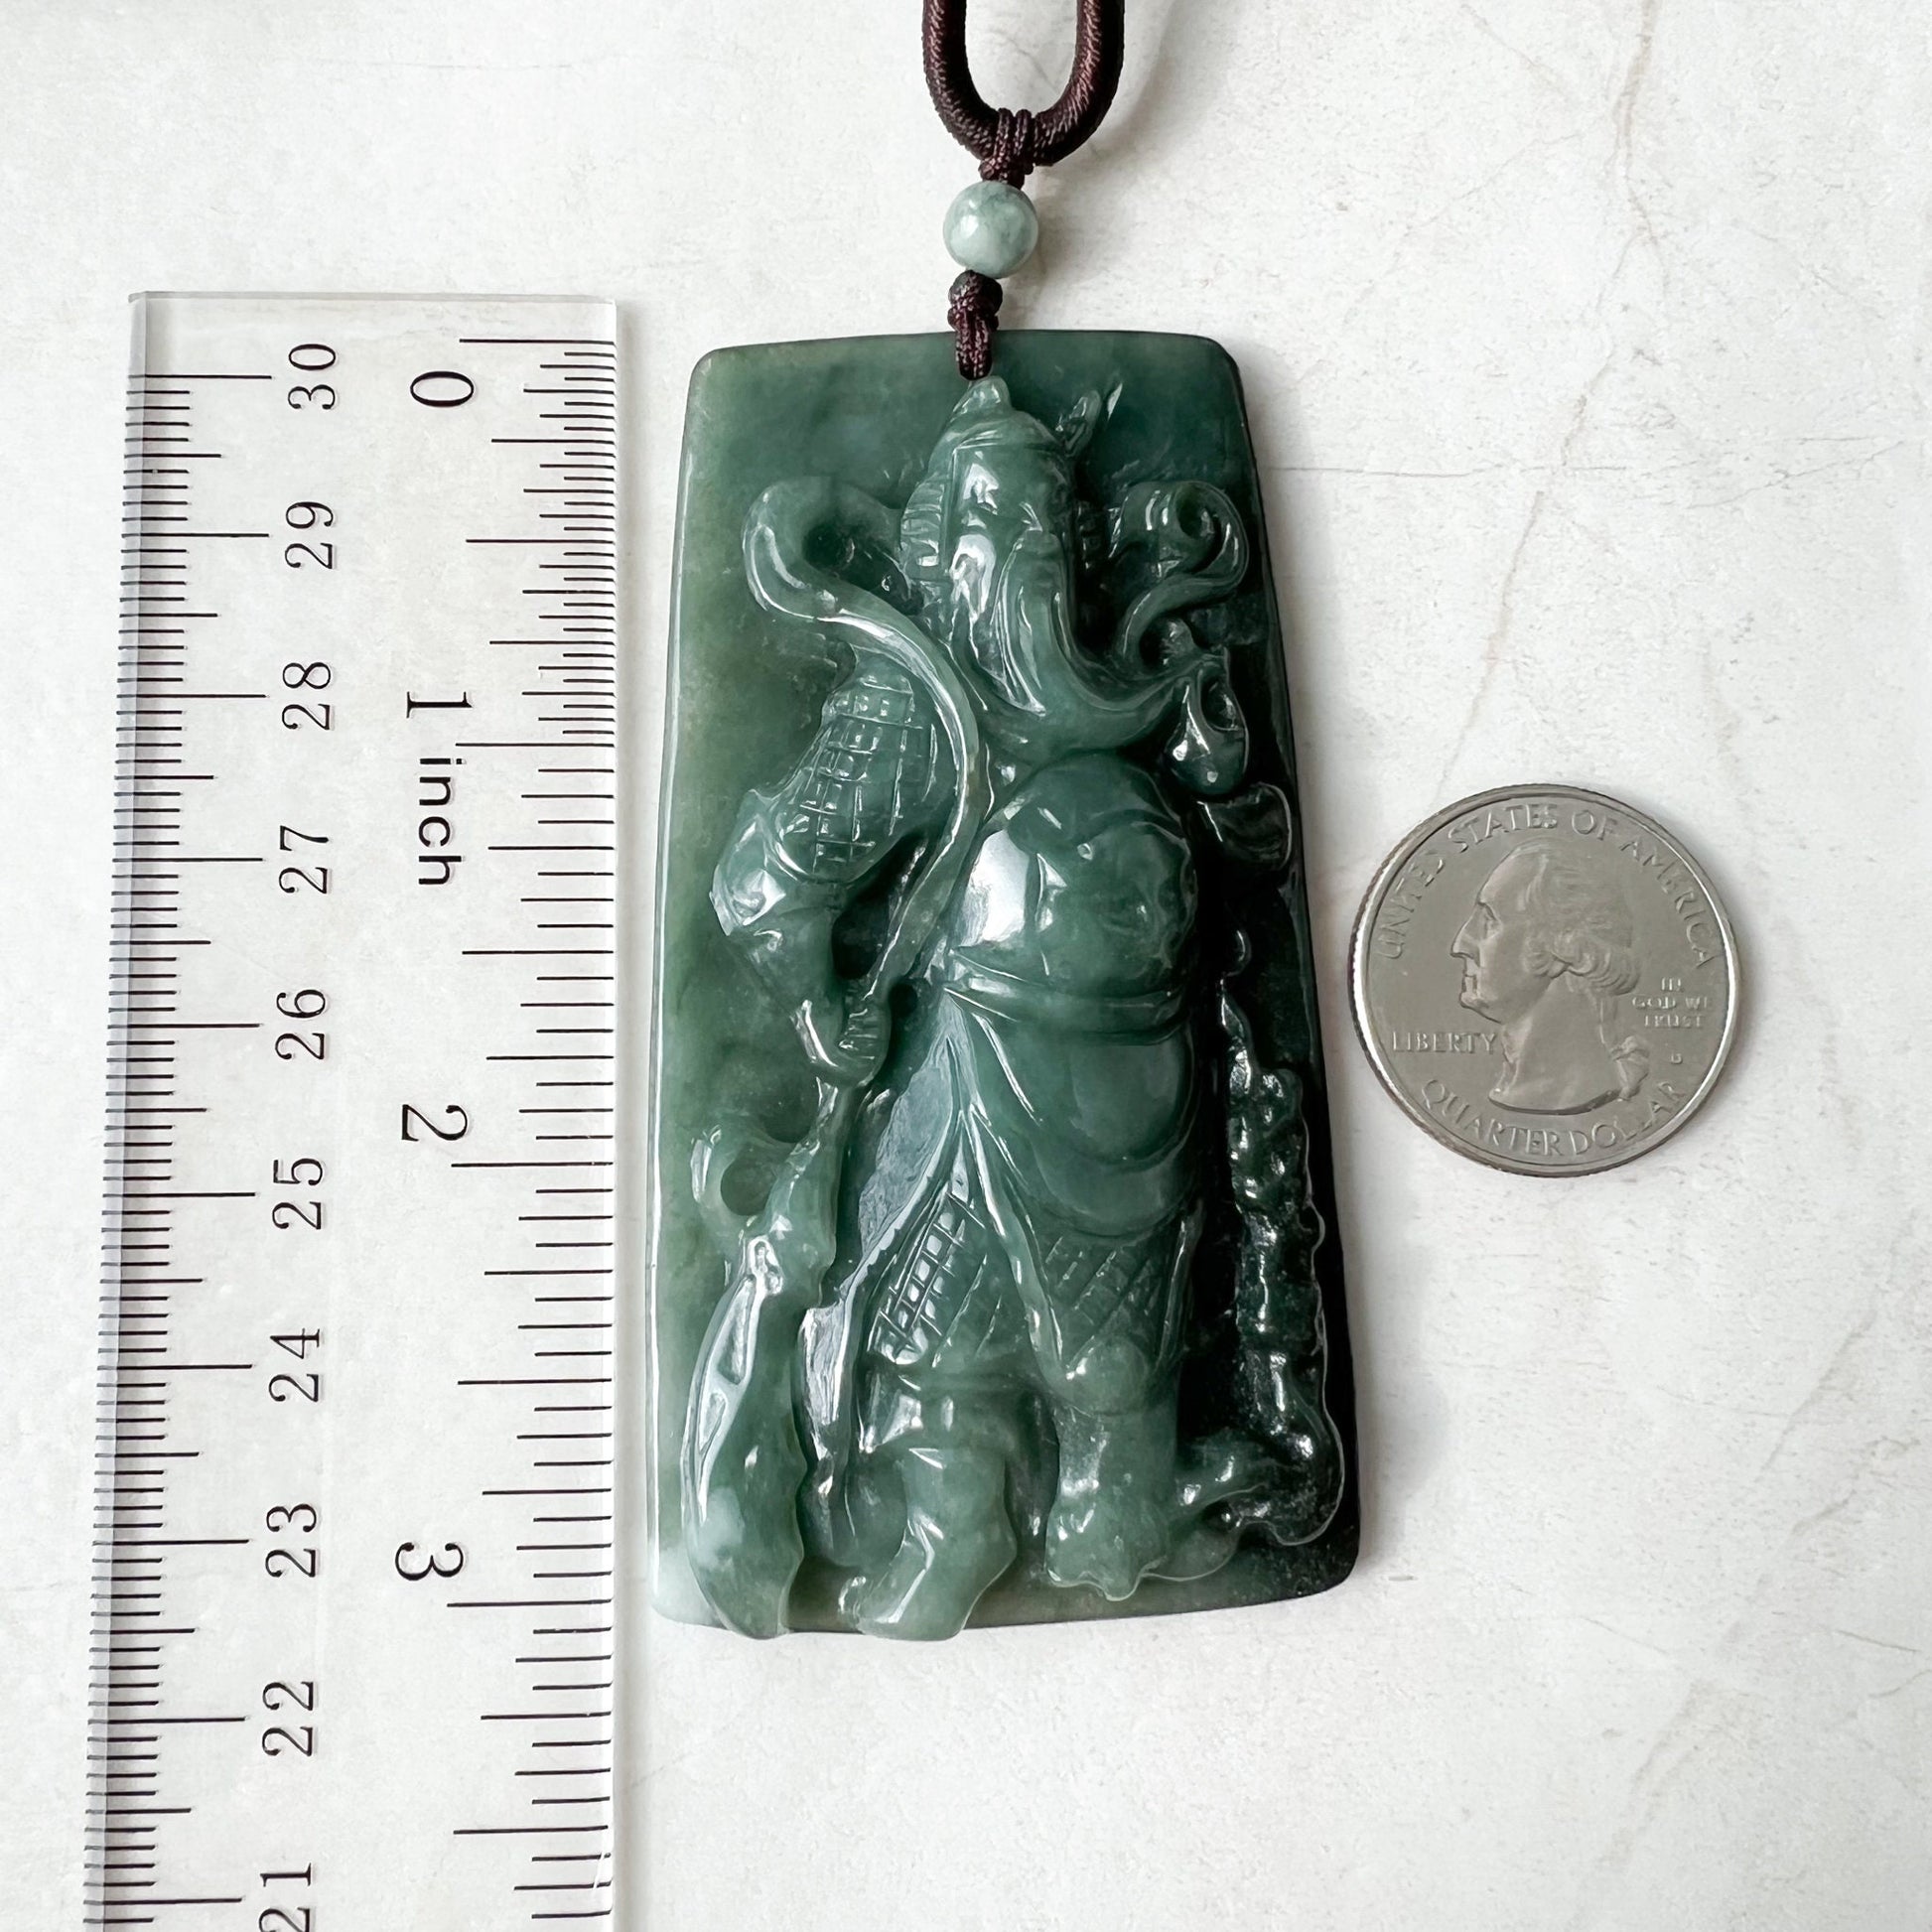 Large Green Jadeite Jade Guan Yu Guan Gong Carved Pendant Necklace, YJ-0621-0244293 - AriaDesignCollection